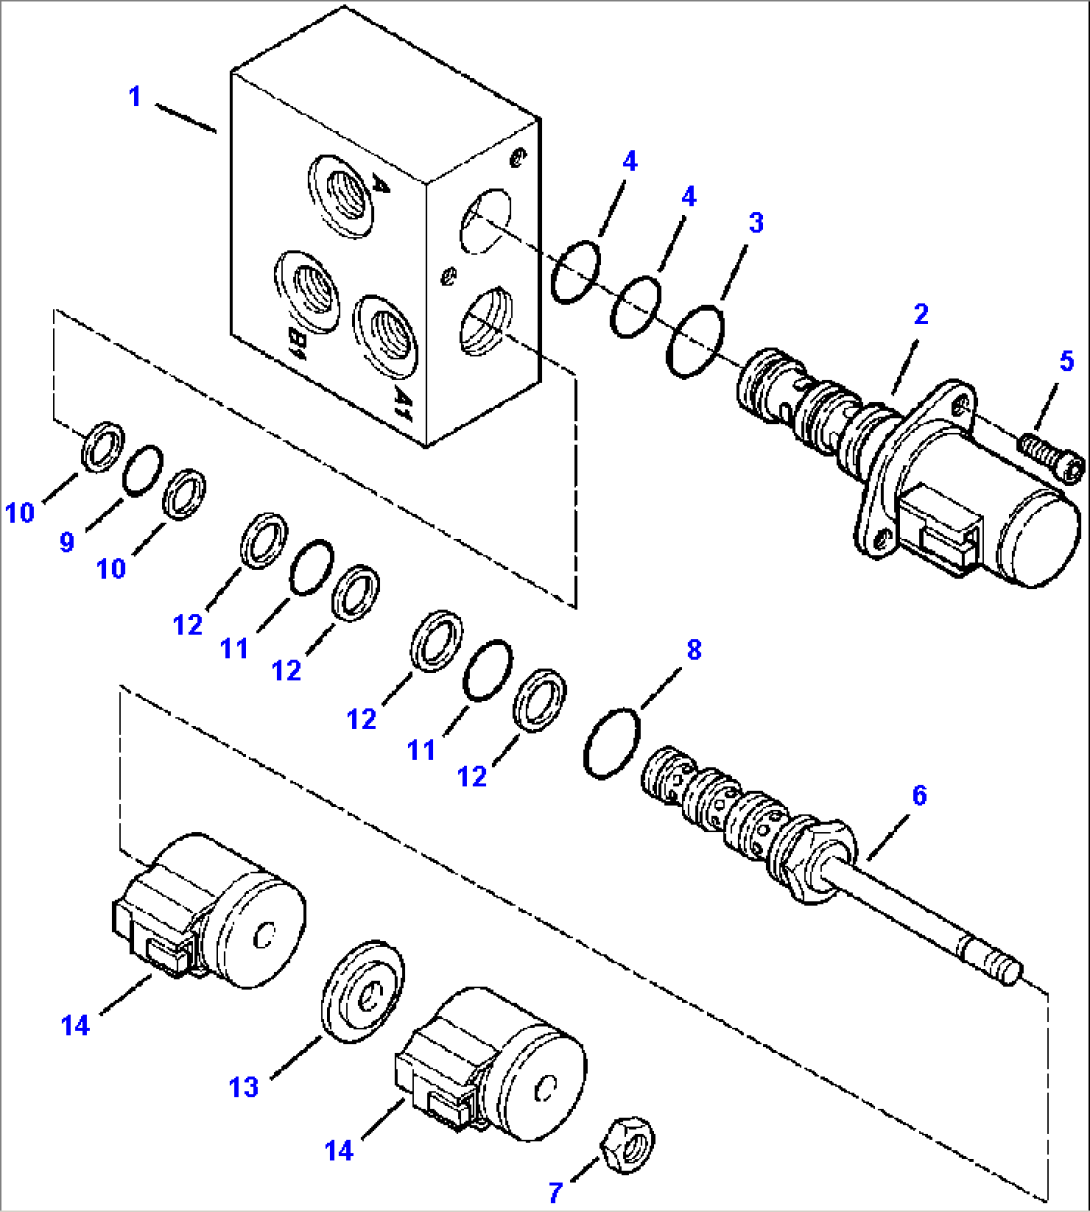 H6254-01A0 SOLENOID VALVE ARM AND/OR HAMMER VALVE